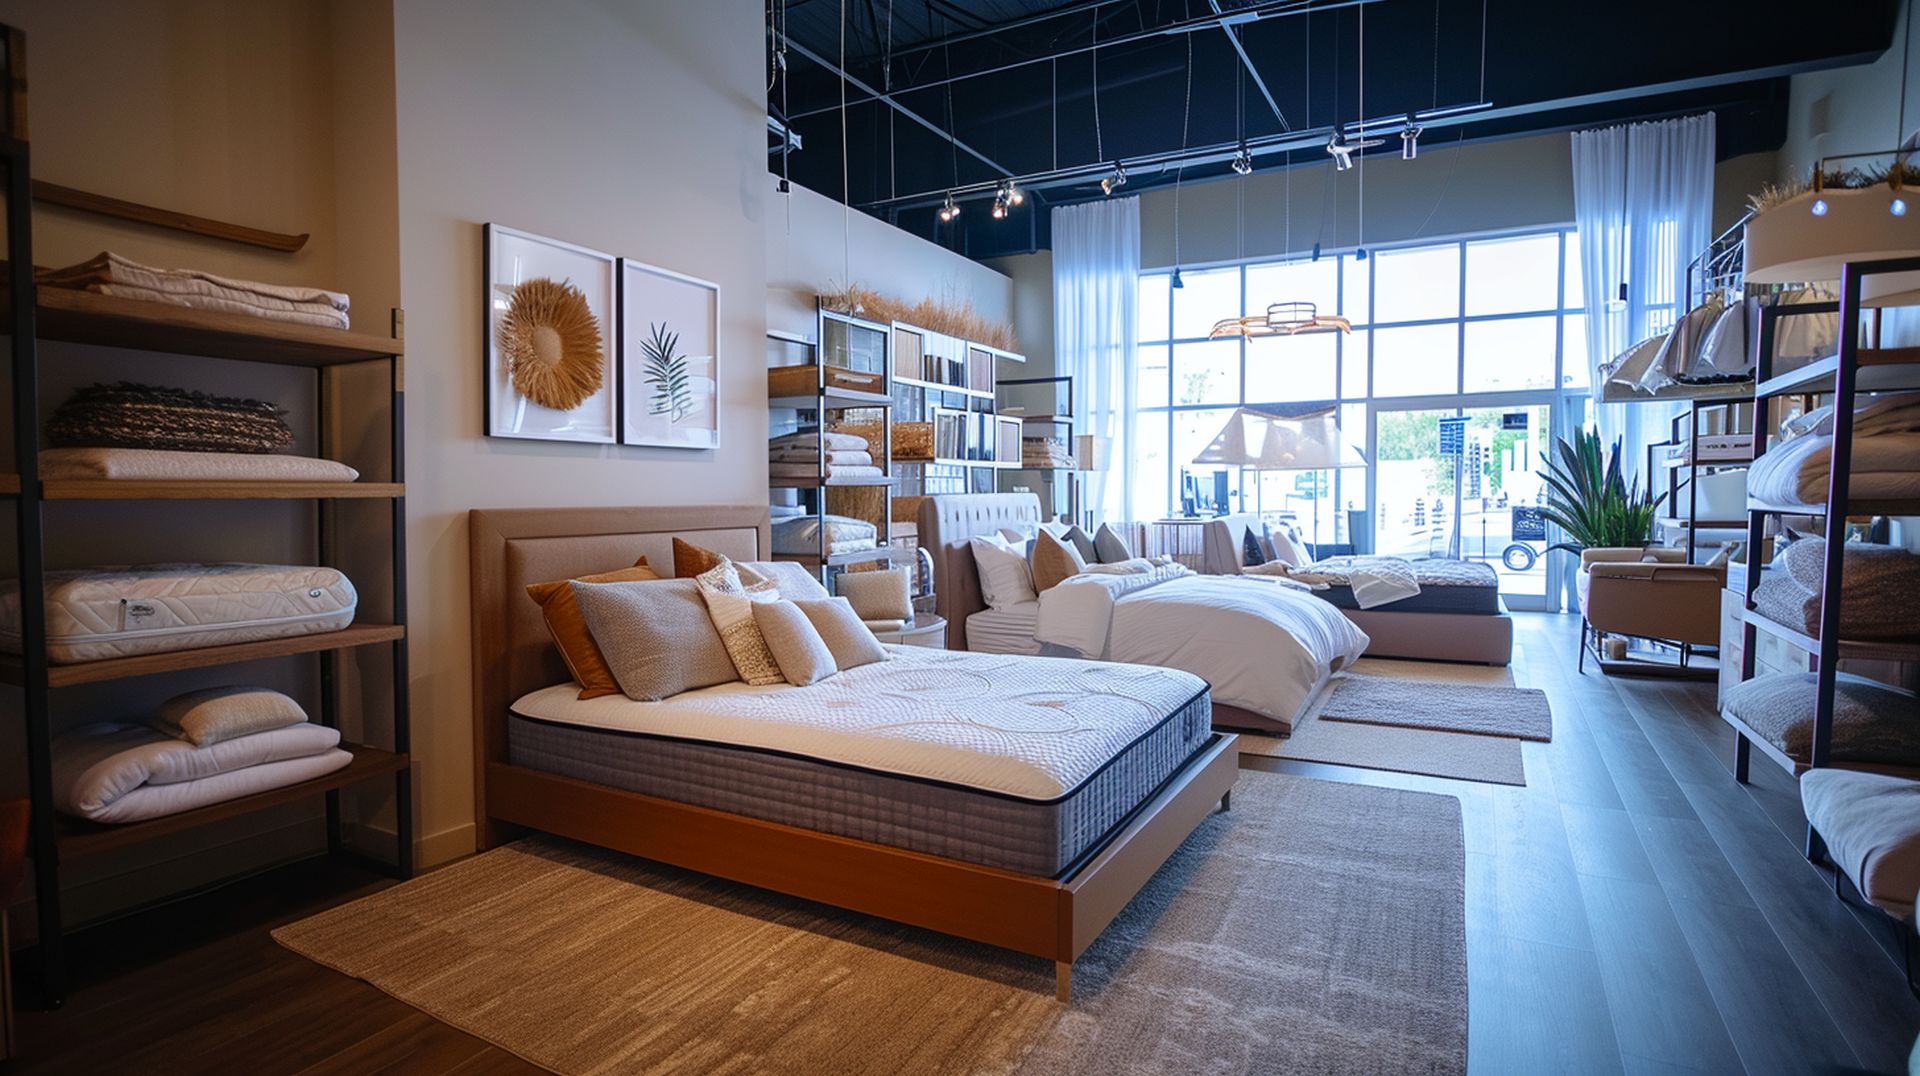 Local Cary mattress stores have the best prices, sales, and deals if you're looking for a new mattress in Cary